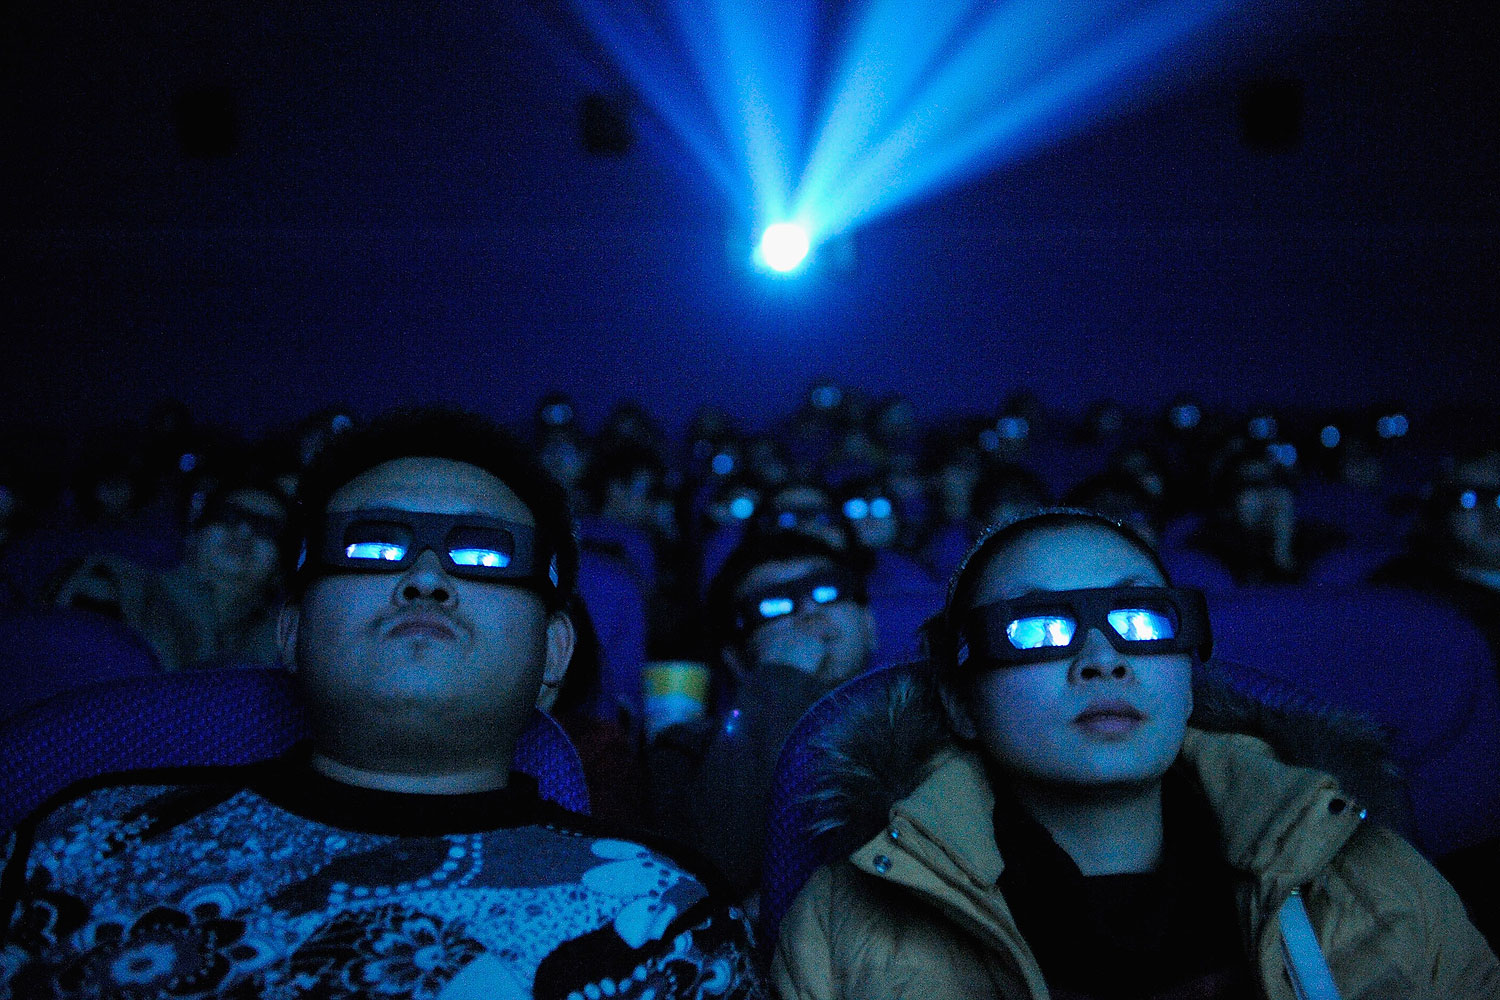 A Chinese cinema audience watches a movie through 3D glasses (ChinaFotoPress—Getty Images)